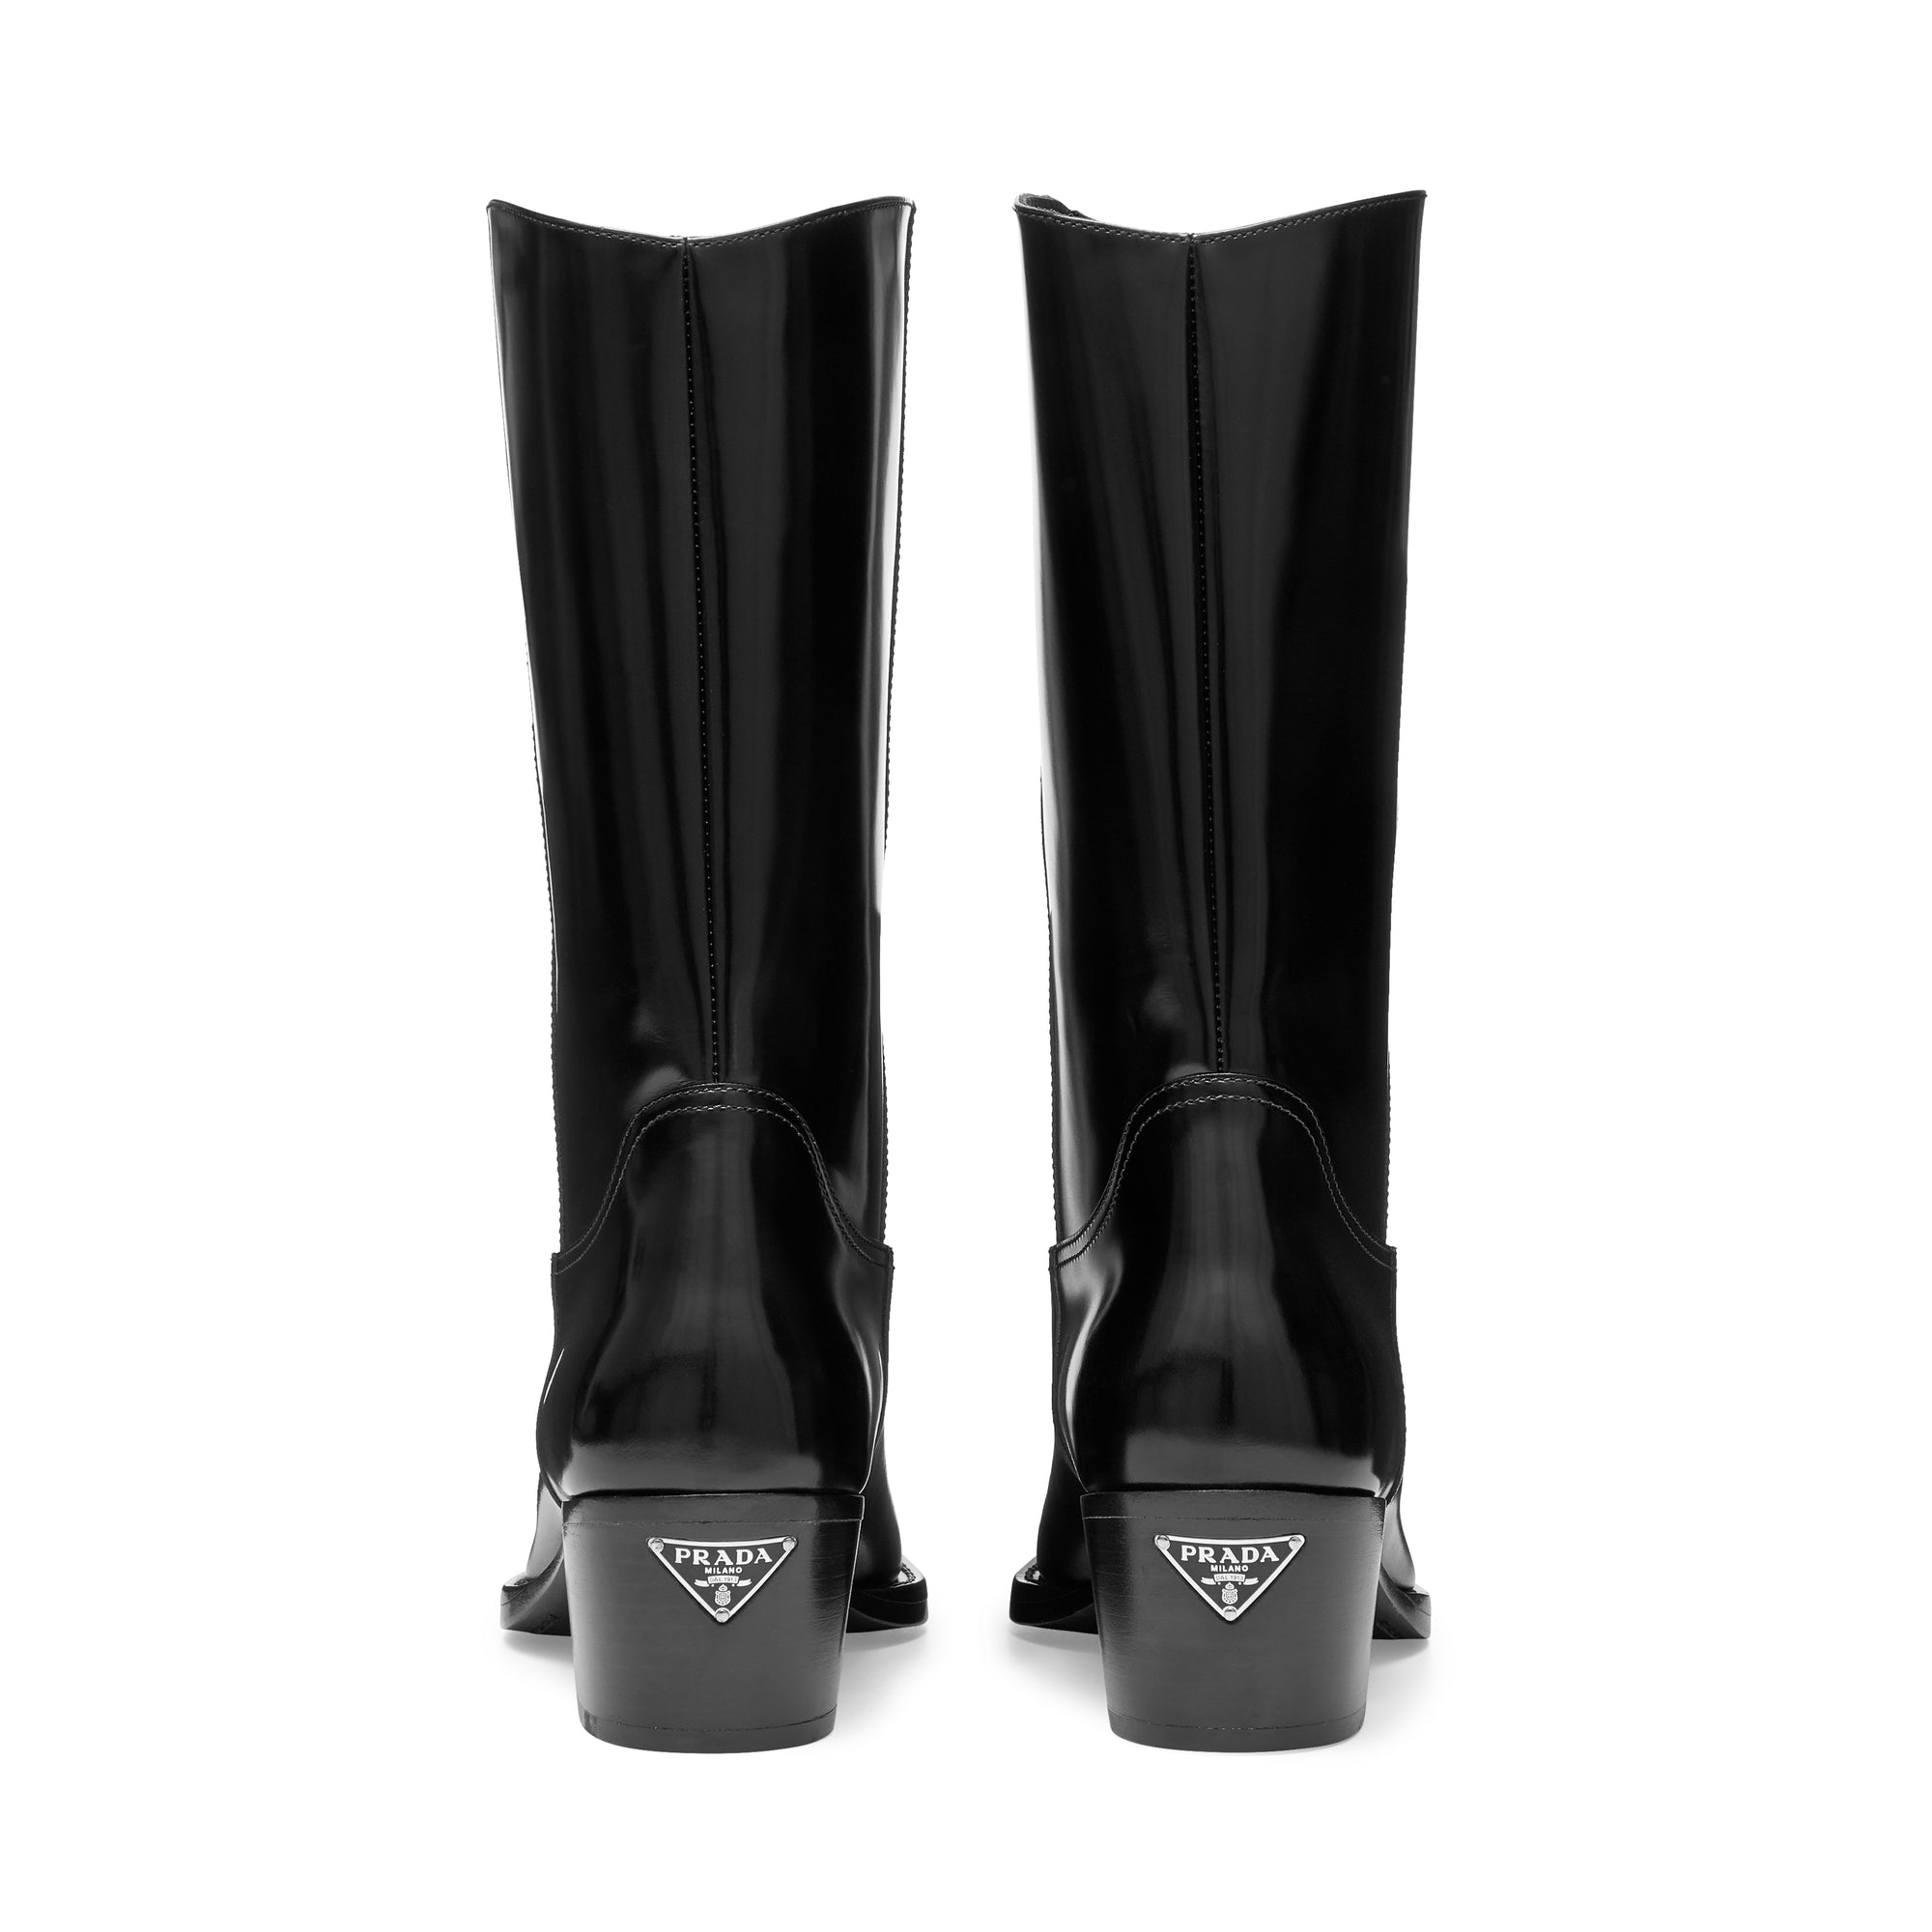 Prada - Women's Brushed Leather Camperos Boots - (Black) view 4